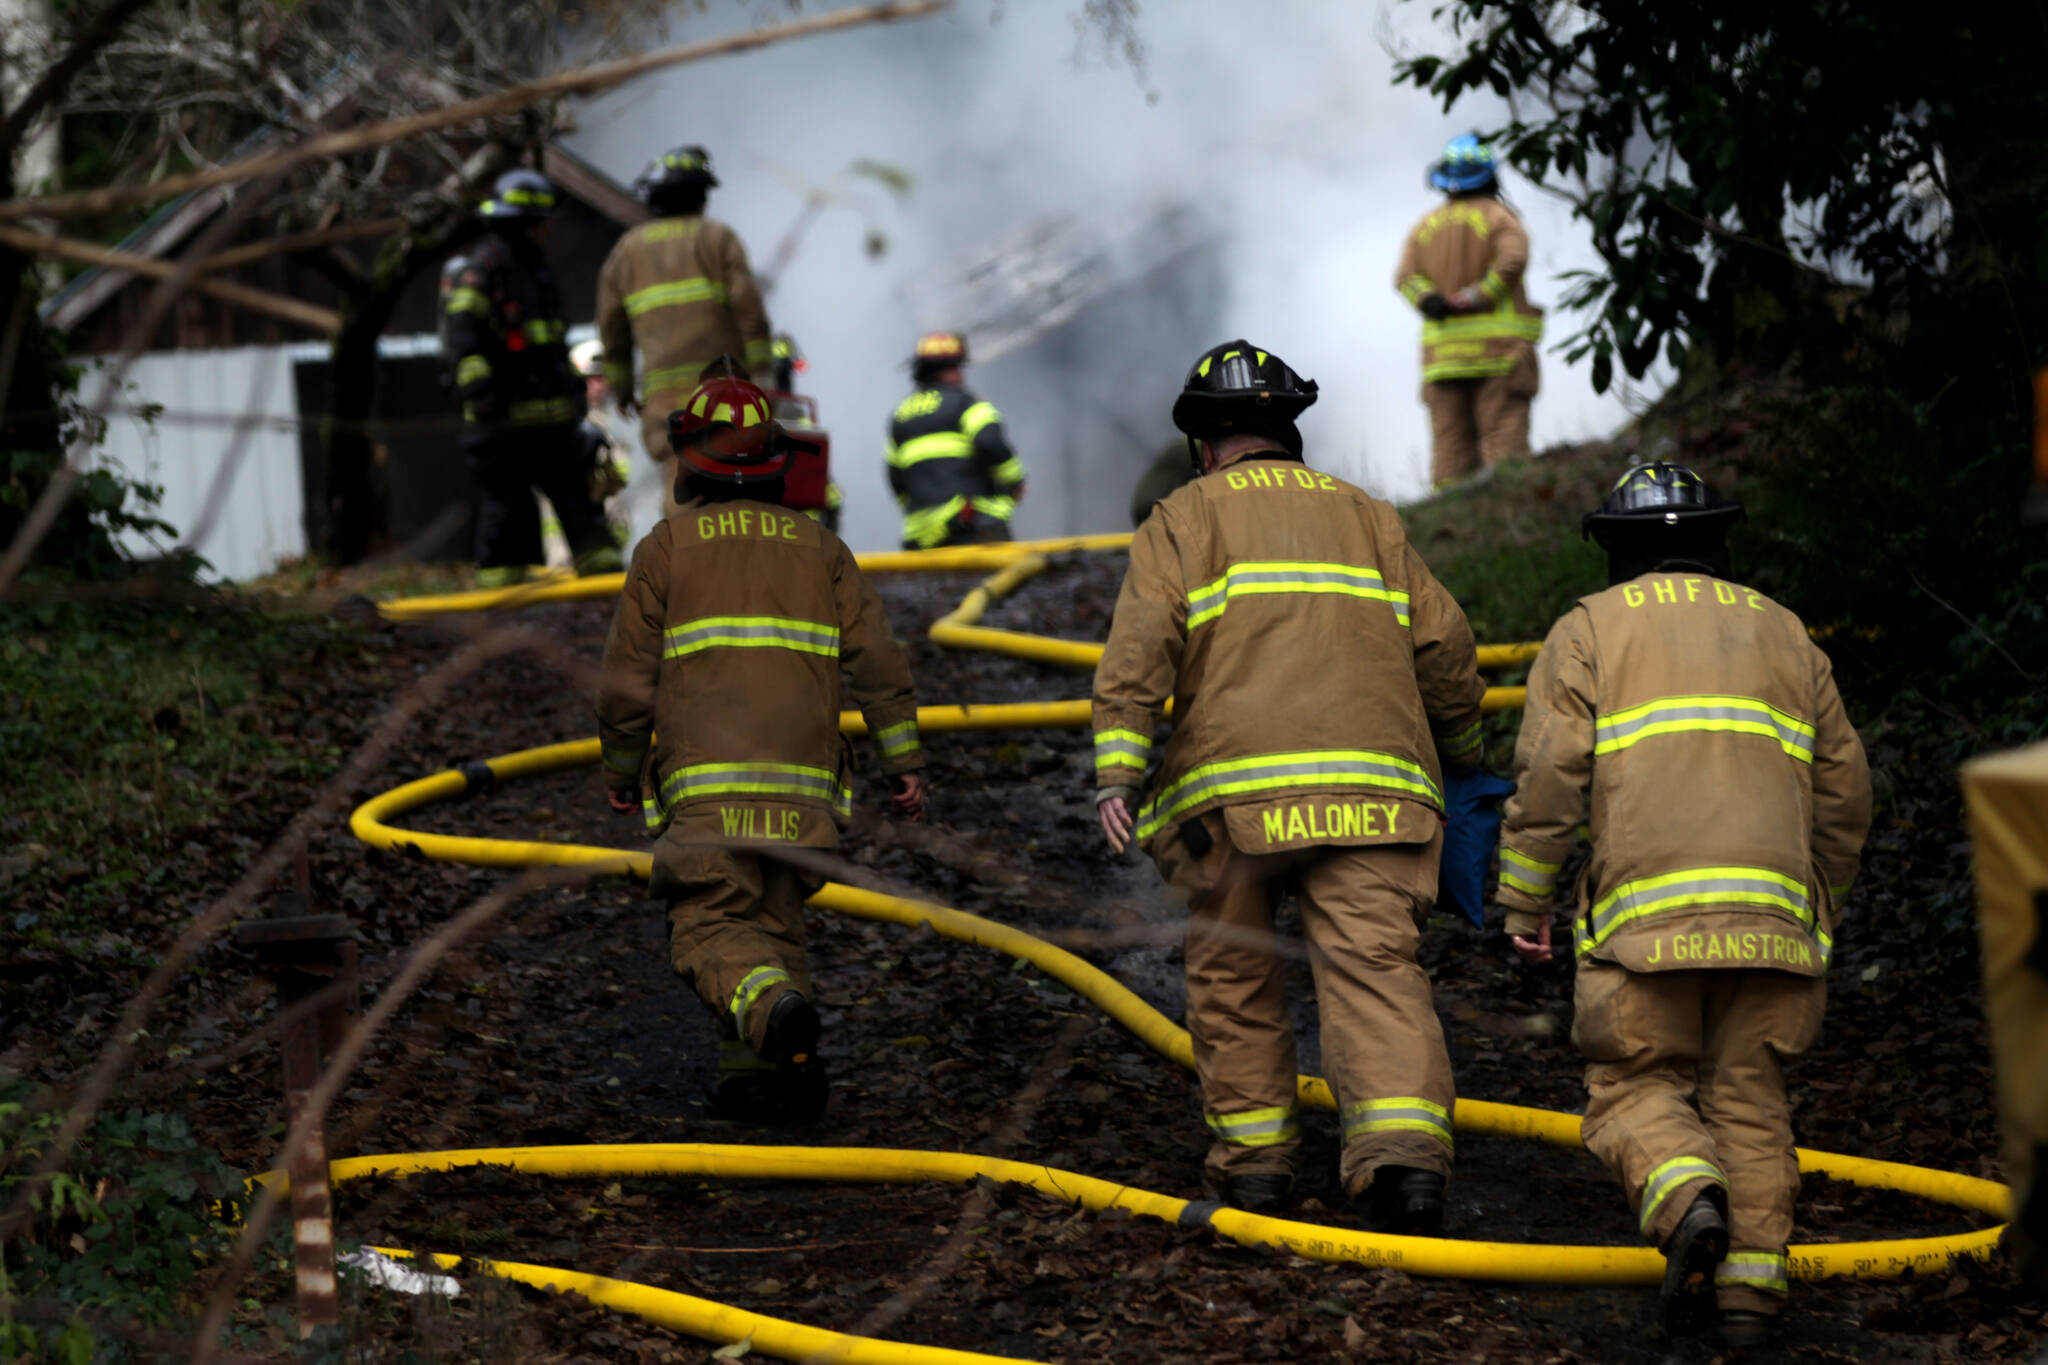 Firefighters climb towards a structure fire that broke out on Dec. 13, 2022 outside of Aberdeen. (Michael S. Lockett / The Daily World File)